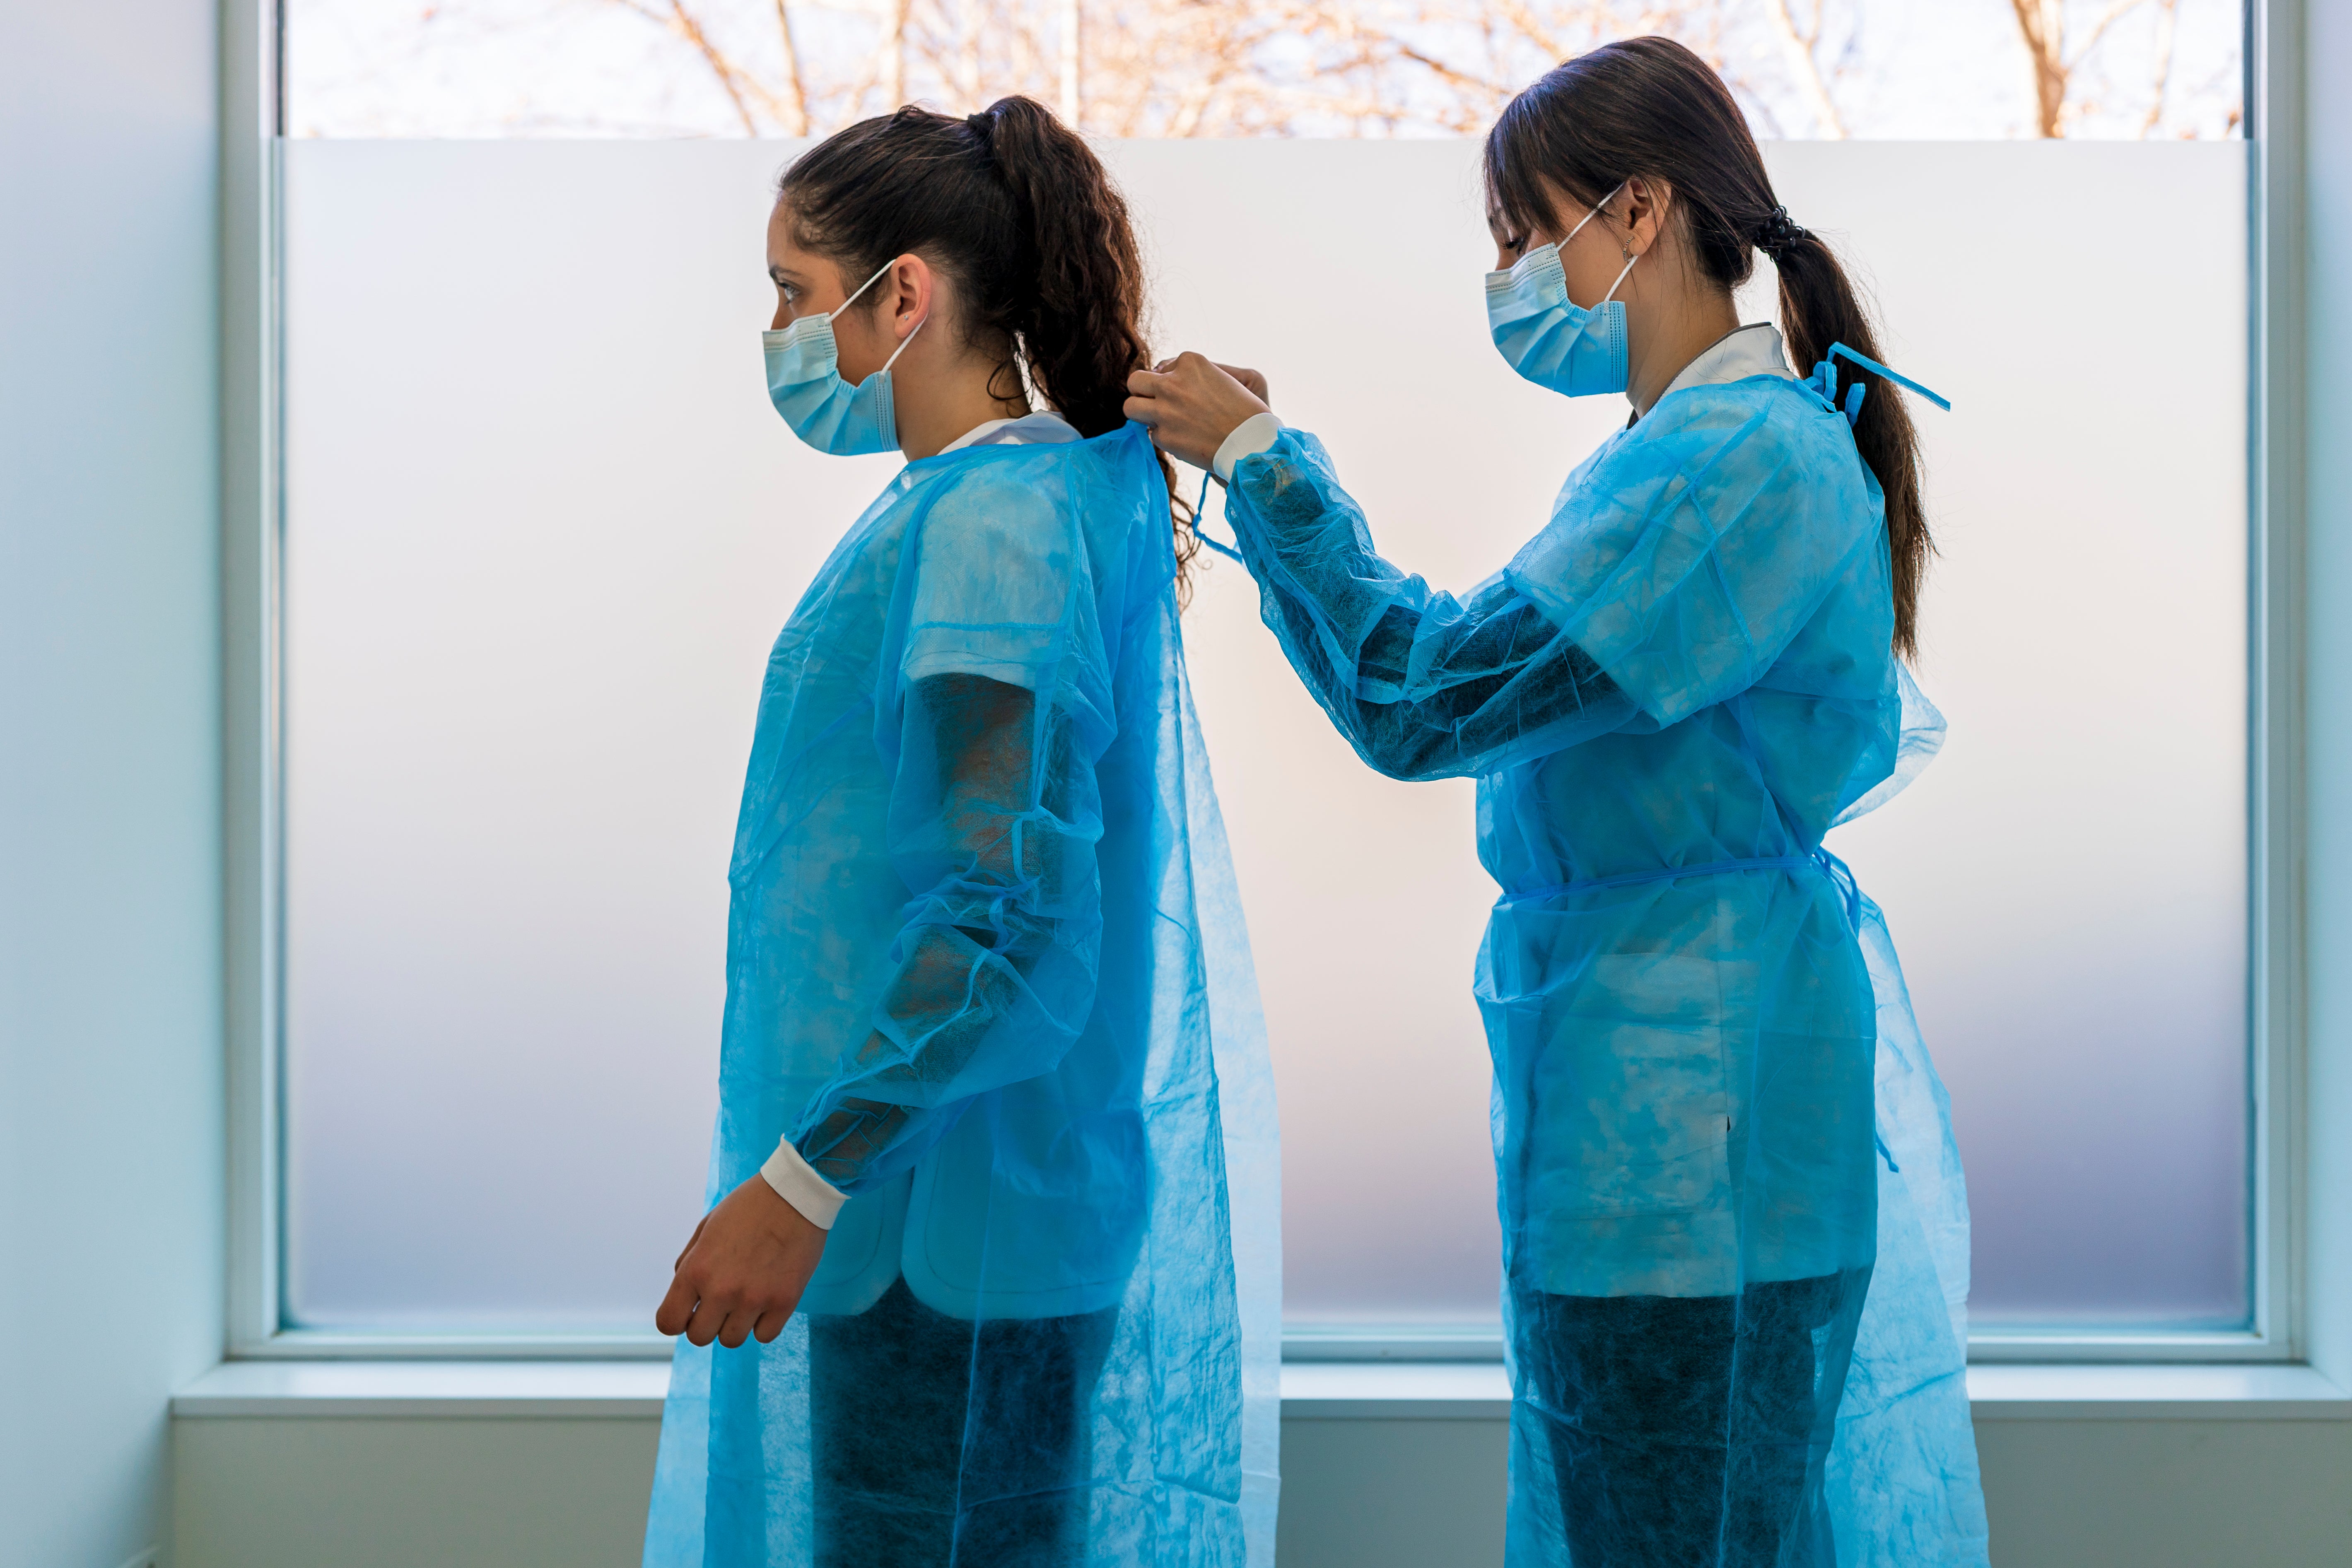 Infection Prevention And Control Foundation - PERSONAL PROTECTIVE EQUIPMENT  FOR COVID-19 1. ISOLATION GOWNS/COVERALLS (FLUID RESISTANT) Use: Disposable  gowns to prevent contamination of clothes of healthcare personnel 2.  NITRILE OR NATURAL RUBBER